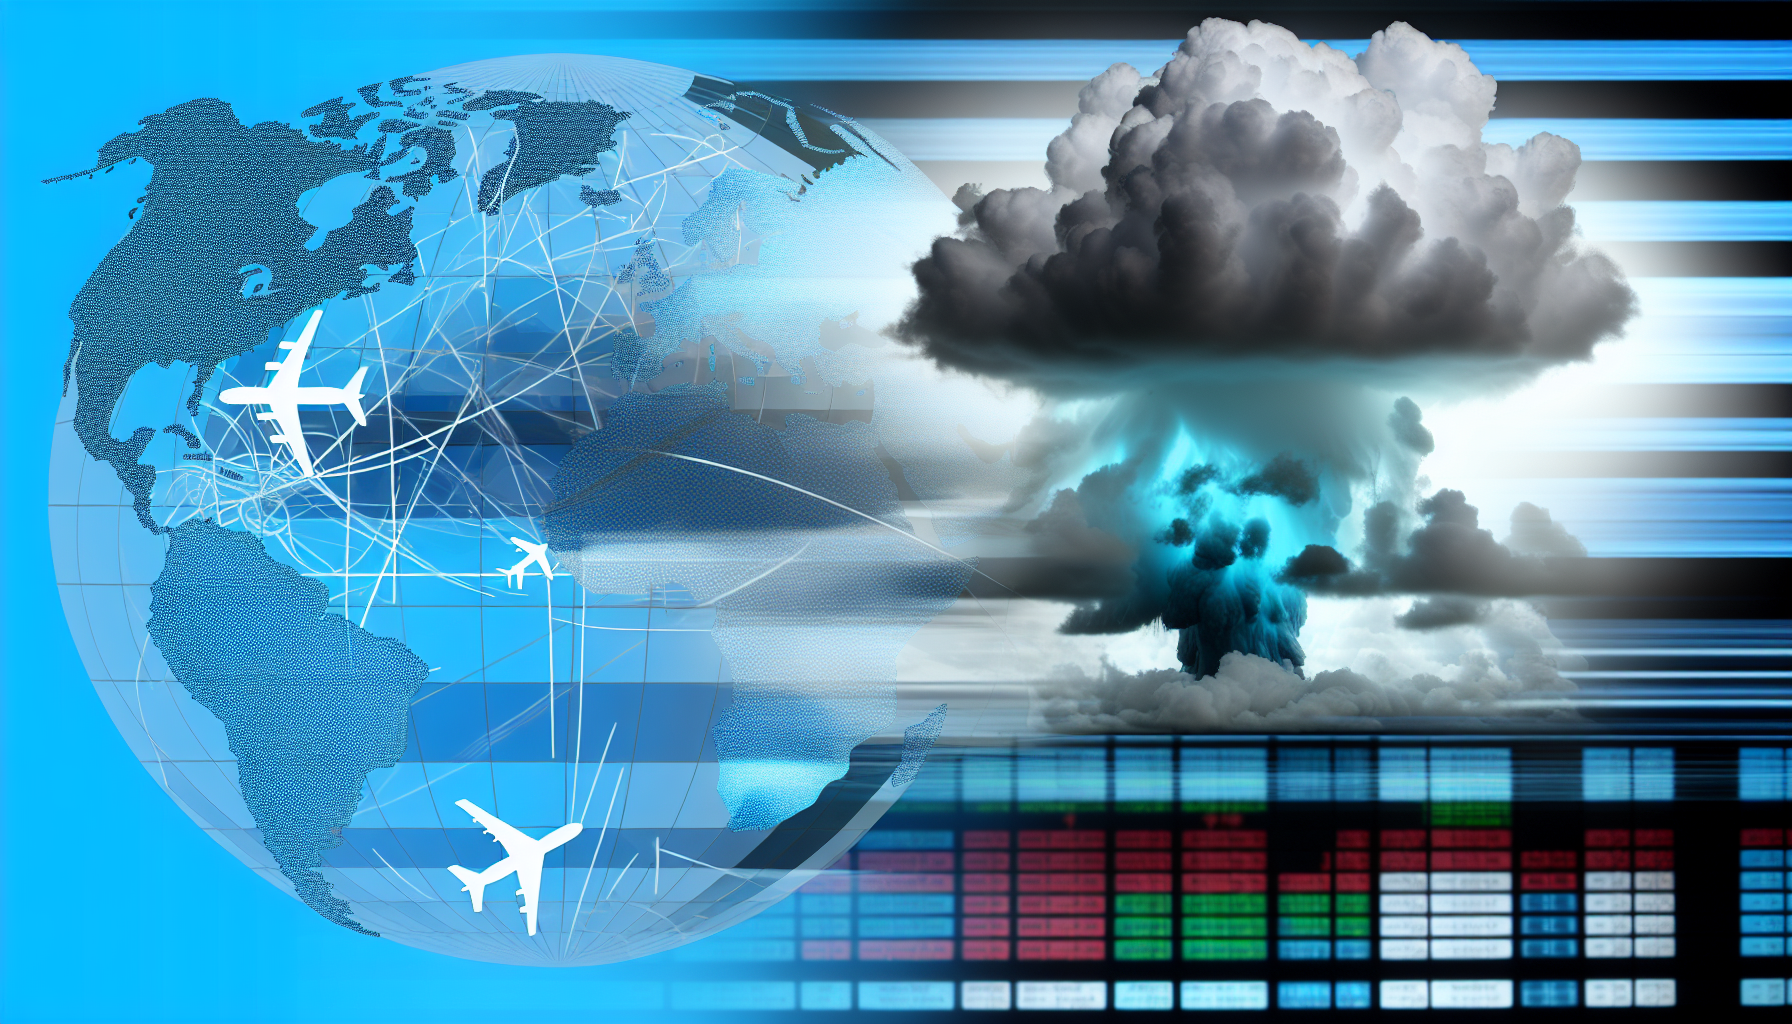 Global travel disruption: unraveling the recent massive IT glitch impacting airlines worldwide